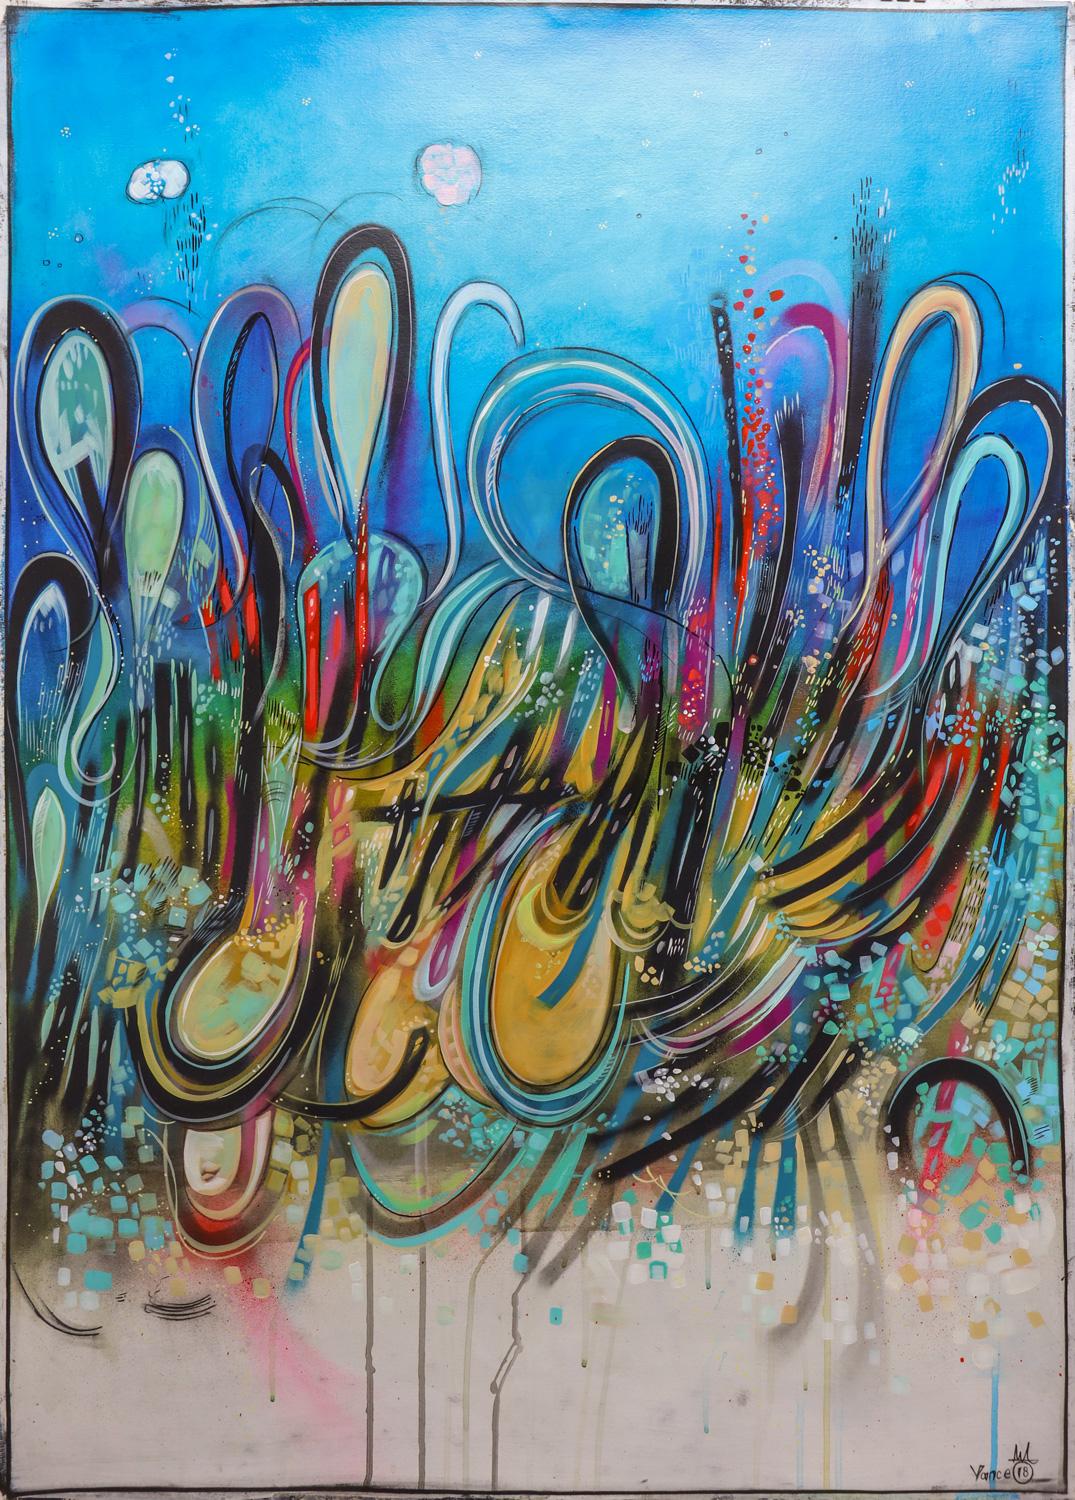 Chris Vance  Abstract Painting - Blue Haze (Abstract painting on paper with bright colored graffiti shapes)